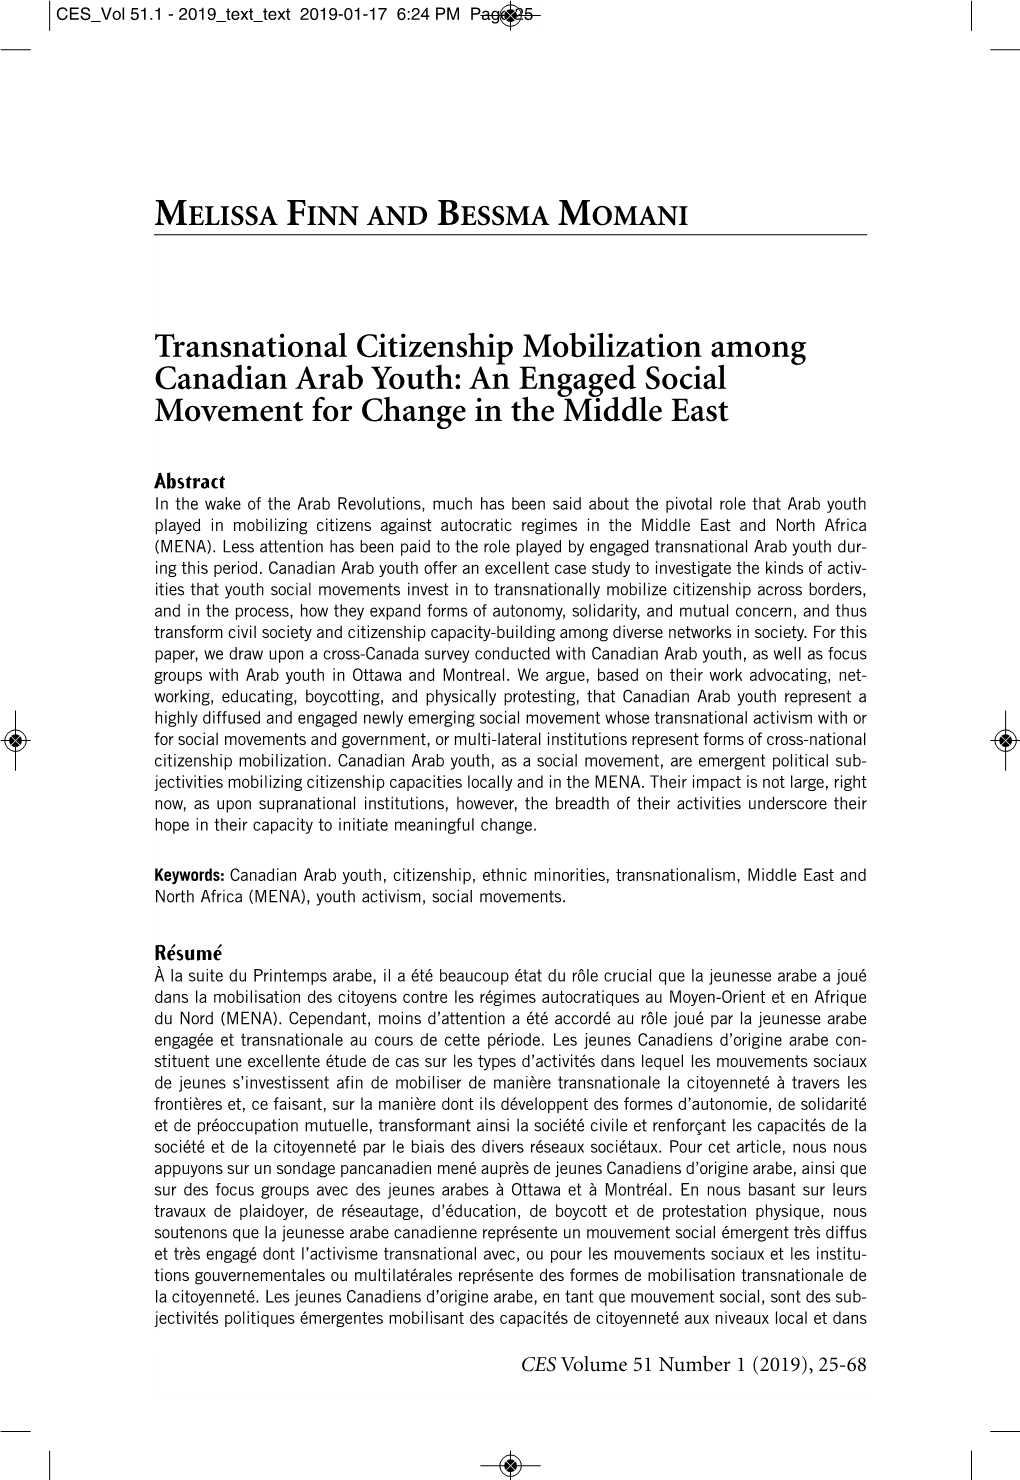 Transnational Citizenship Mobilization Among Canadian Arab Youth: an Engaged Social Movement for Change in the Middle East